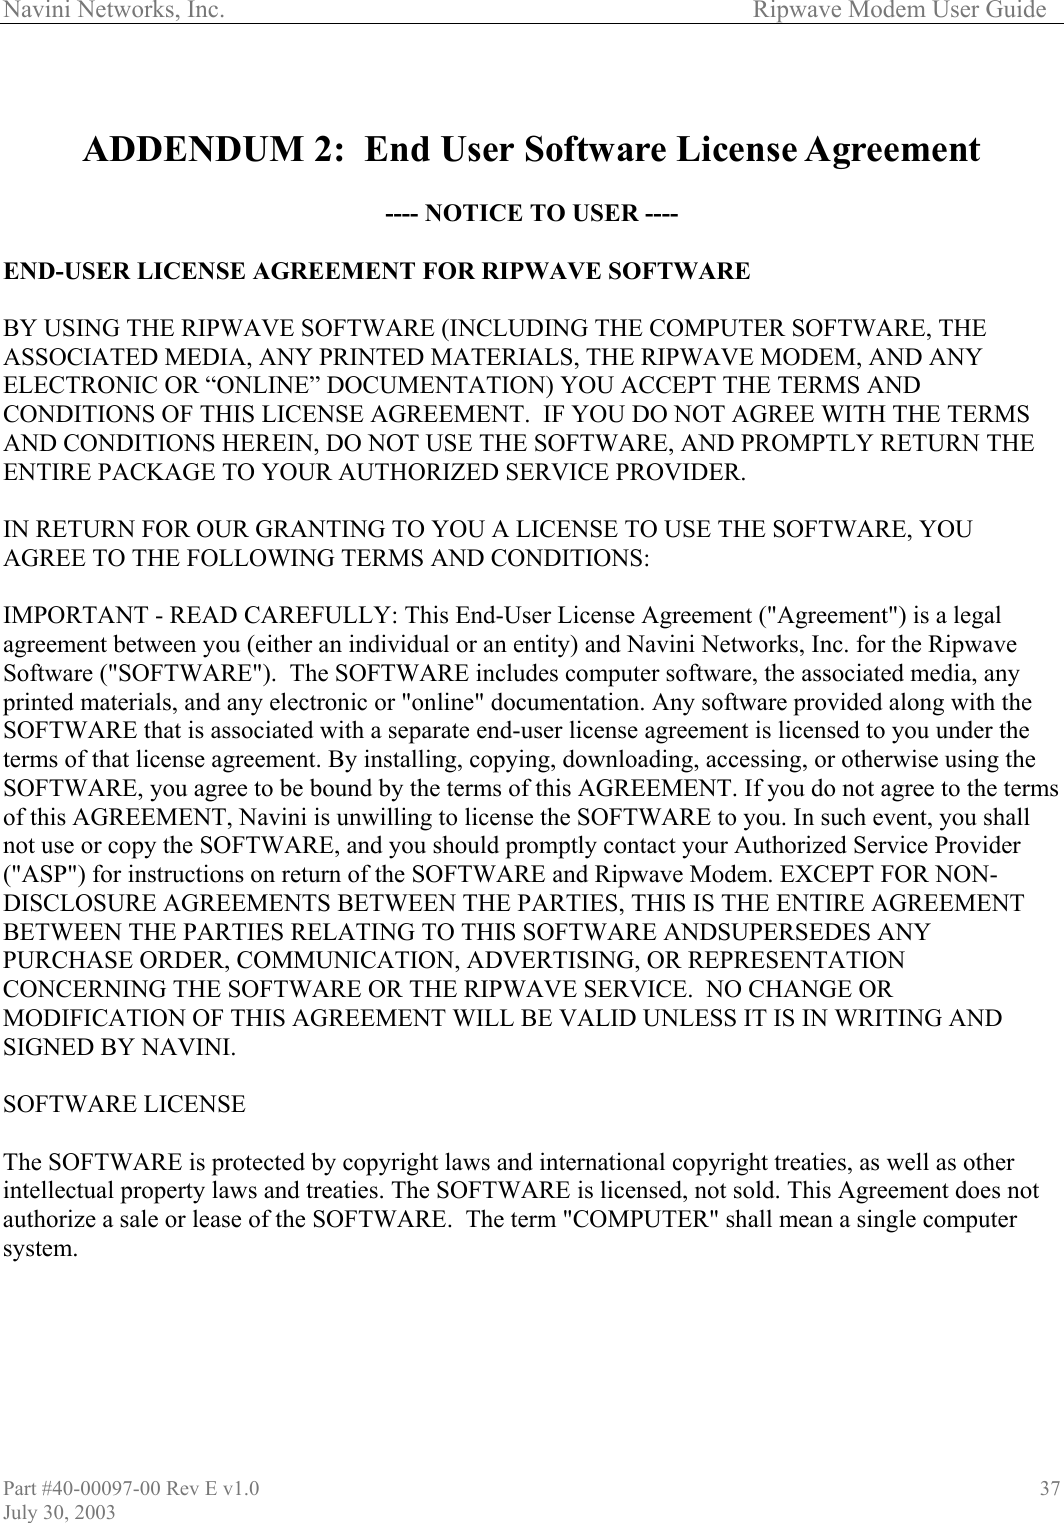 Navini Networks, Inc.        Ripwave Modem User Guide Part #40-00097-00 Rev E v1.0 July 30, 2003 37  ADDENDUM 2:  End User Software License Agreement  ---- NOTICE TO USER ----  END-USER LICENSE AGREEMENT FOR RIPWAVE SOFTWARE  BY USING THE RIPWAVE SOFTWARE (INCLUDING THE COMPUTER SOFTWARE, THE ASSOCIATED MEDIA, ANY PRINTED MATERIALS, THE RIPWAVE MODEM, AND ANY ELECTRONIC OR “ONLINE” DOCUMENTATION) YOU ACCEPT THE TERMS AND CONDITIONS OF THIS LICENSE AGREEMENT.  IF YOU DO NOT AGREE WITH THE TERMS AND CONDITIONS HEREIN, DO NOT USE THE SOFTWARE, AND PROMPTLY RETURN THE ENTIRE PACKAGE TO YOUR AUTHORIZED SERVICE PROVIDER.  IN RETURN FOR OUR GRANTING TO YOU A LICENSE TO USE THE SOFTWARE, YOU AGREE TO THE FOLLOWING TERMS AND CONDITIONS:  IMPORTANT - READ CAREFULLY: This End-User License Agreement (&quot;Agreement&quot;) is a legal agreement between you (either an individual or an entity) and Navini Networks, Inc. for the Ripwave Software (&quot;SOFTWARE&quot;).  The SOFTWARE includes computer software, the associated media, any printed materials, and any electronic or &quot;online&quot; documentation. Any software provided along with the SOFTWARE that is associated with a separate end-user license agreement is licensed to you under the terms of that license agreement. By installing, copying, downloading, accessing, or otherwise using the SOFTWARE, you agree to be bound by the terms of this AGREEMENT. If you do not agree to the terms of this AGREEMENT, Navini is unwilling to license the SOFTWARE to you. In such event, you shall not use or copy the SOFTWARE, and you should promptly contact your Authorized Service Provider (&quot;ASP&quot;) for instructions on return of the SOFTWARE and Ripwave Modem. EXCEPT FOR NON-DISCLOSURE AGREEMENTS BETWEEN THE PARTIES, THIS IS THE ENTIRE AGREEMENT BETWEEN THE PARTIES RELATING TO THIS SOFTWARE ANDSUPERSEDES ANY PURCHASE ORDER, COMMUNICATION, ADVERTISING, OR REPRESENTATION CONCERNING THE SOFTWARE OR THE RIPWAVE SERVICE.  NO CHANGE OR MODIFICATION OF THIS AGREEMENT WILL BE VALID UNLESS IT IS IN WRITING AND SIGNED BY NAVINI.  SOFTWARE LICENSE  The SOFTWARE is protected by copyright laws and international copyright treaties, as well as other intellectual property laws and treaties. The SOFTWARE is licensed, not sold. This Agreement does not authorize a sale or lease of the SOFTWARE.  The term &quot;COMPUTER&quot; shall mean a single computer system.   